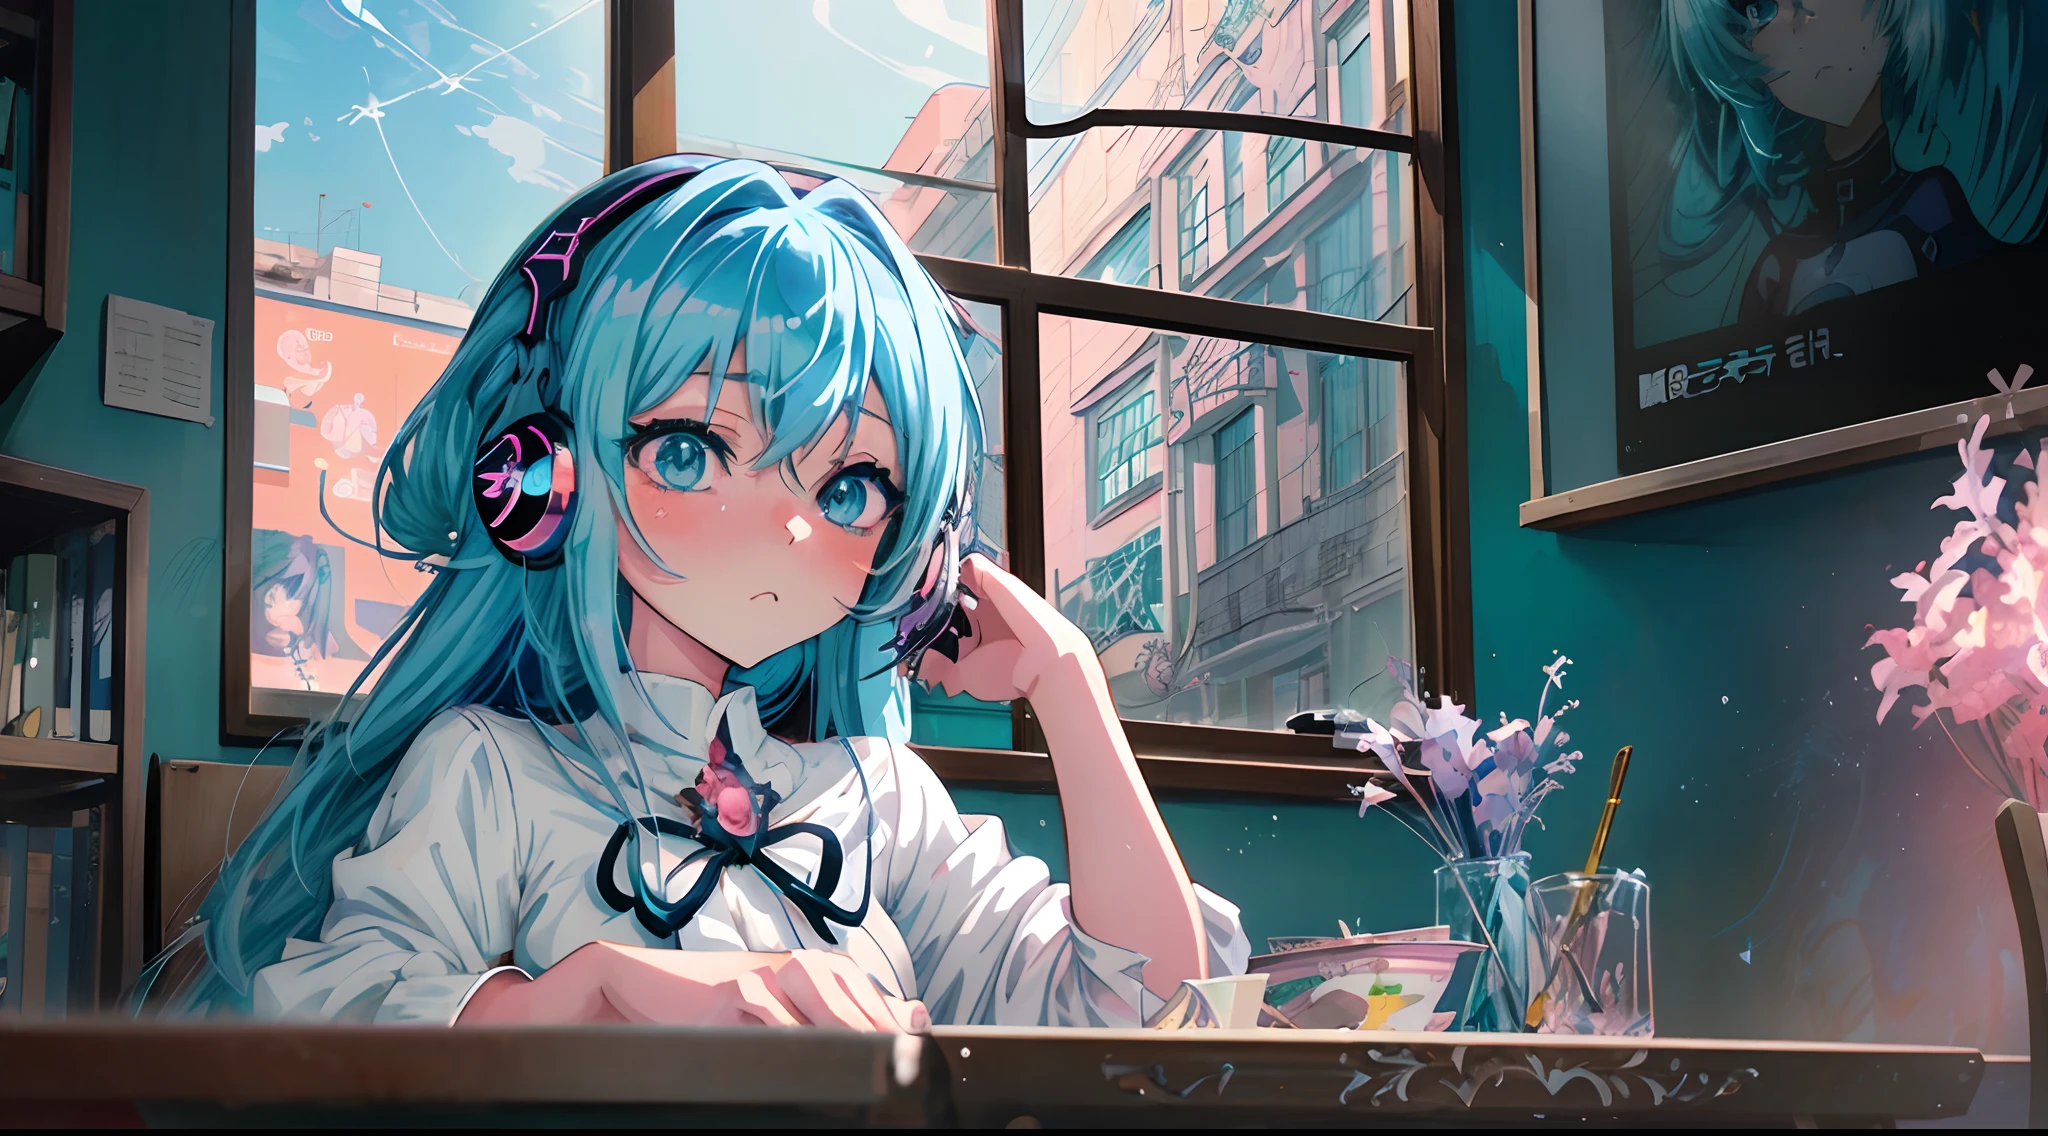 Mare　　Mermaid Girl　Beautiful blue eyes　blue hairs　Tsundere　Twilight　Lonely Gweiz's style artwork、Beautiful anime、 Alone　guweiz、Beautiful anime girl、Beautiful anime girl、Anime girl with teal hair、anime styled。8K、Bowater's Art Style、beautiful digital illustrations、beautiful character painting、Stunning Anime Face Portrait Mikudayo, official artwork, lofi-girl, lofi artstyle,, sayori, anime vibes, Anime style mixed with Fujifilm, digital anime illustration, anime wallpaper 4k　Sea view window　Study at your desk　headphones